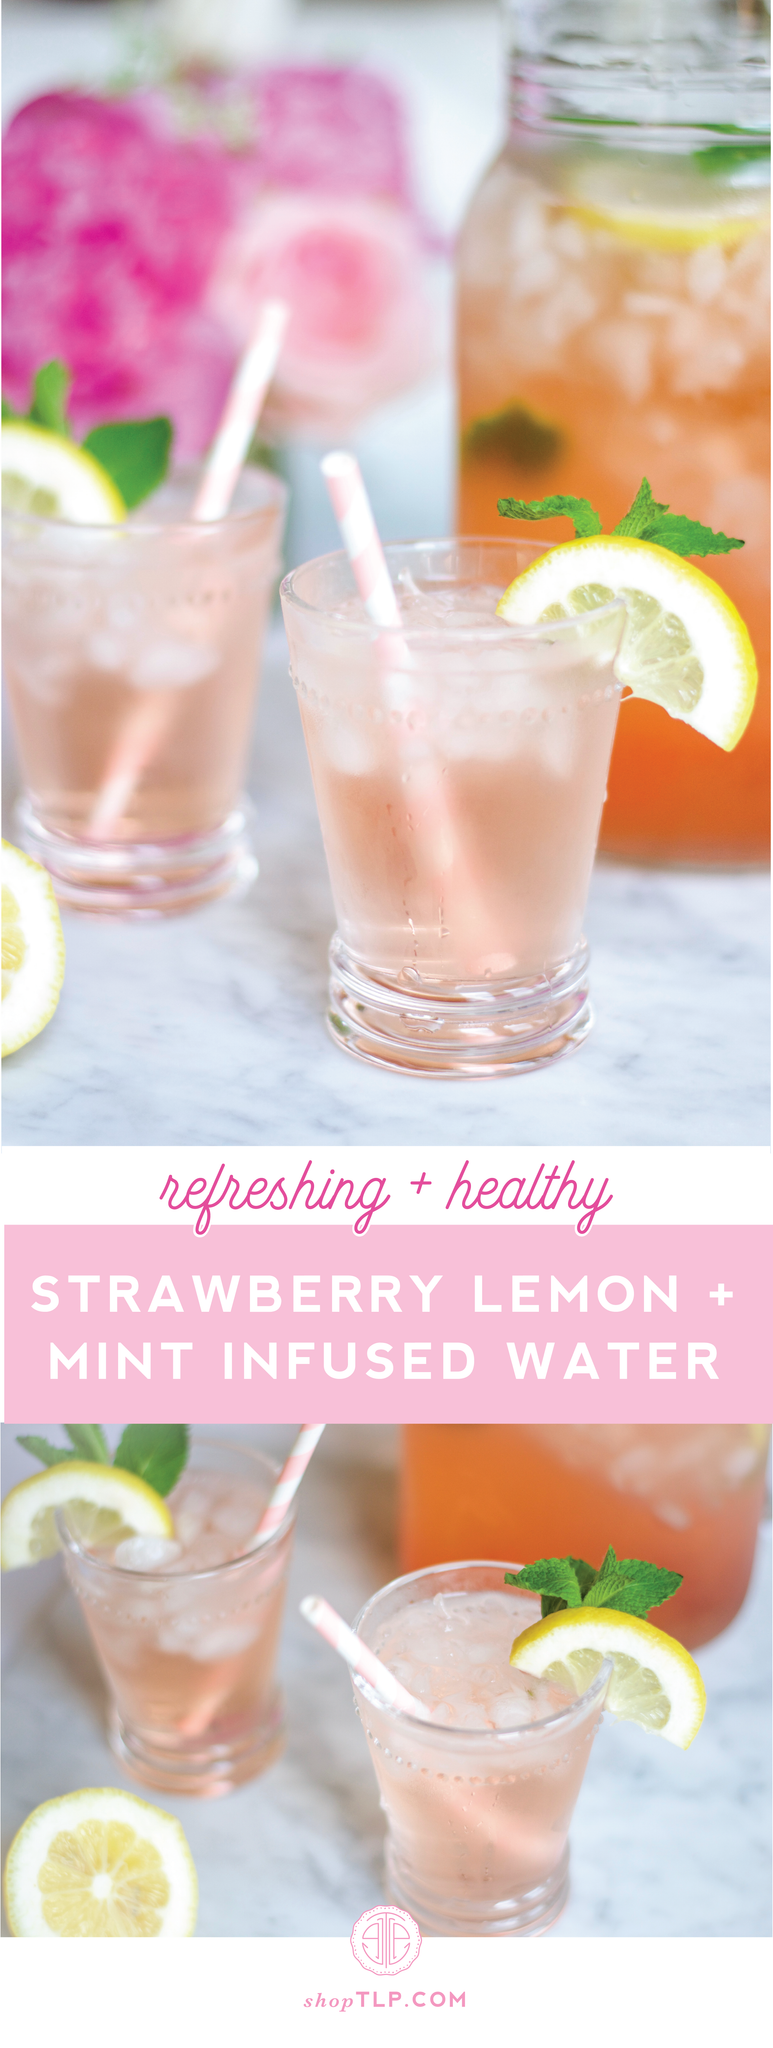 strawberry lemon mint infused water recipe by the little palm